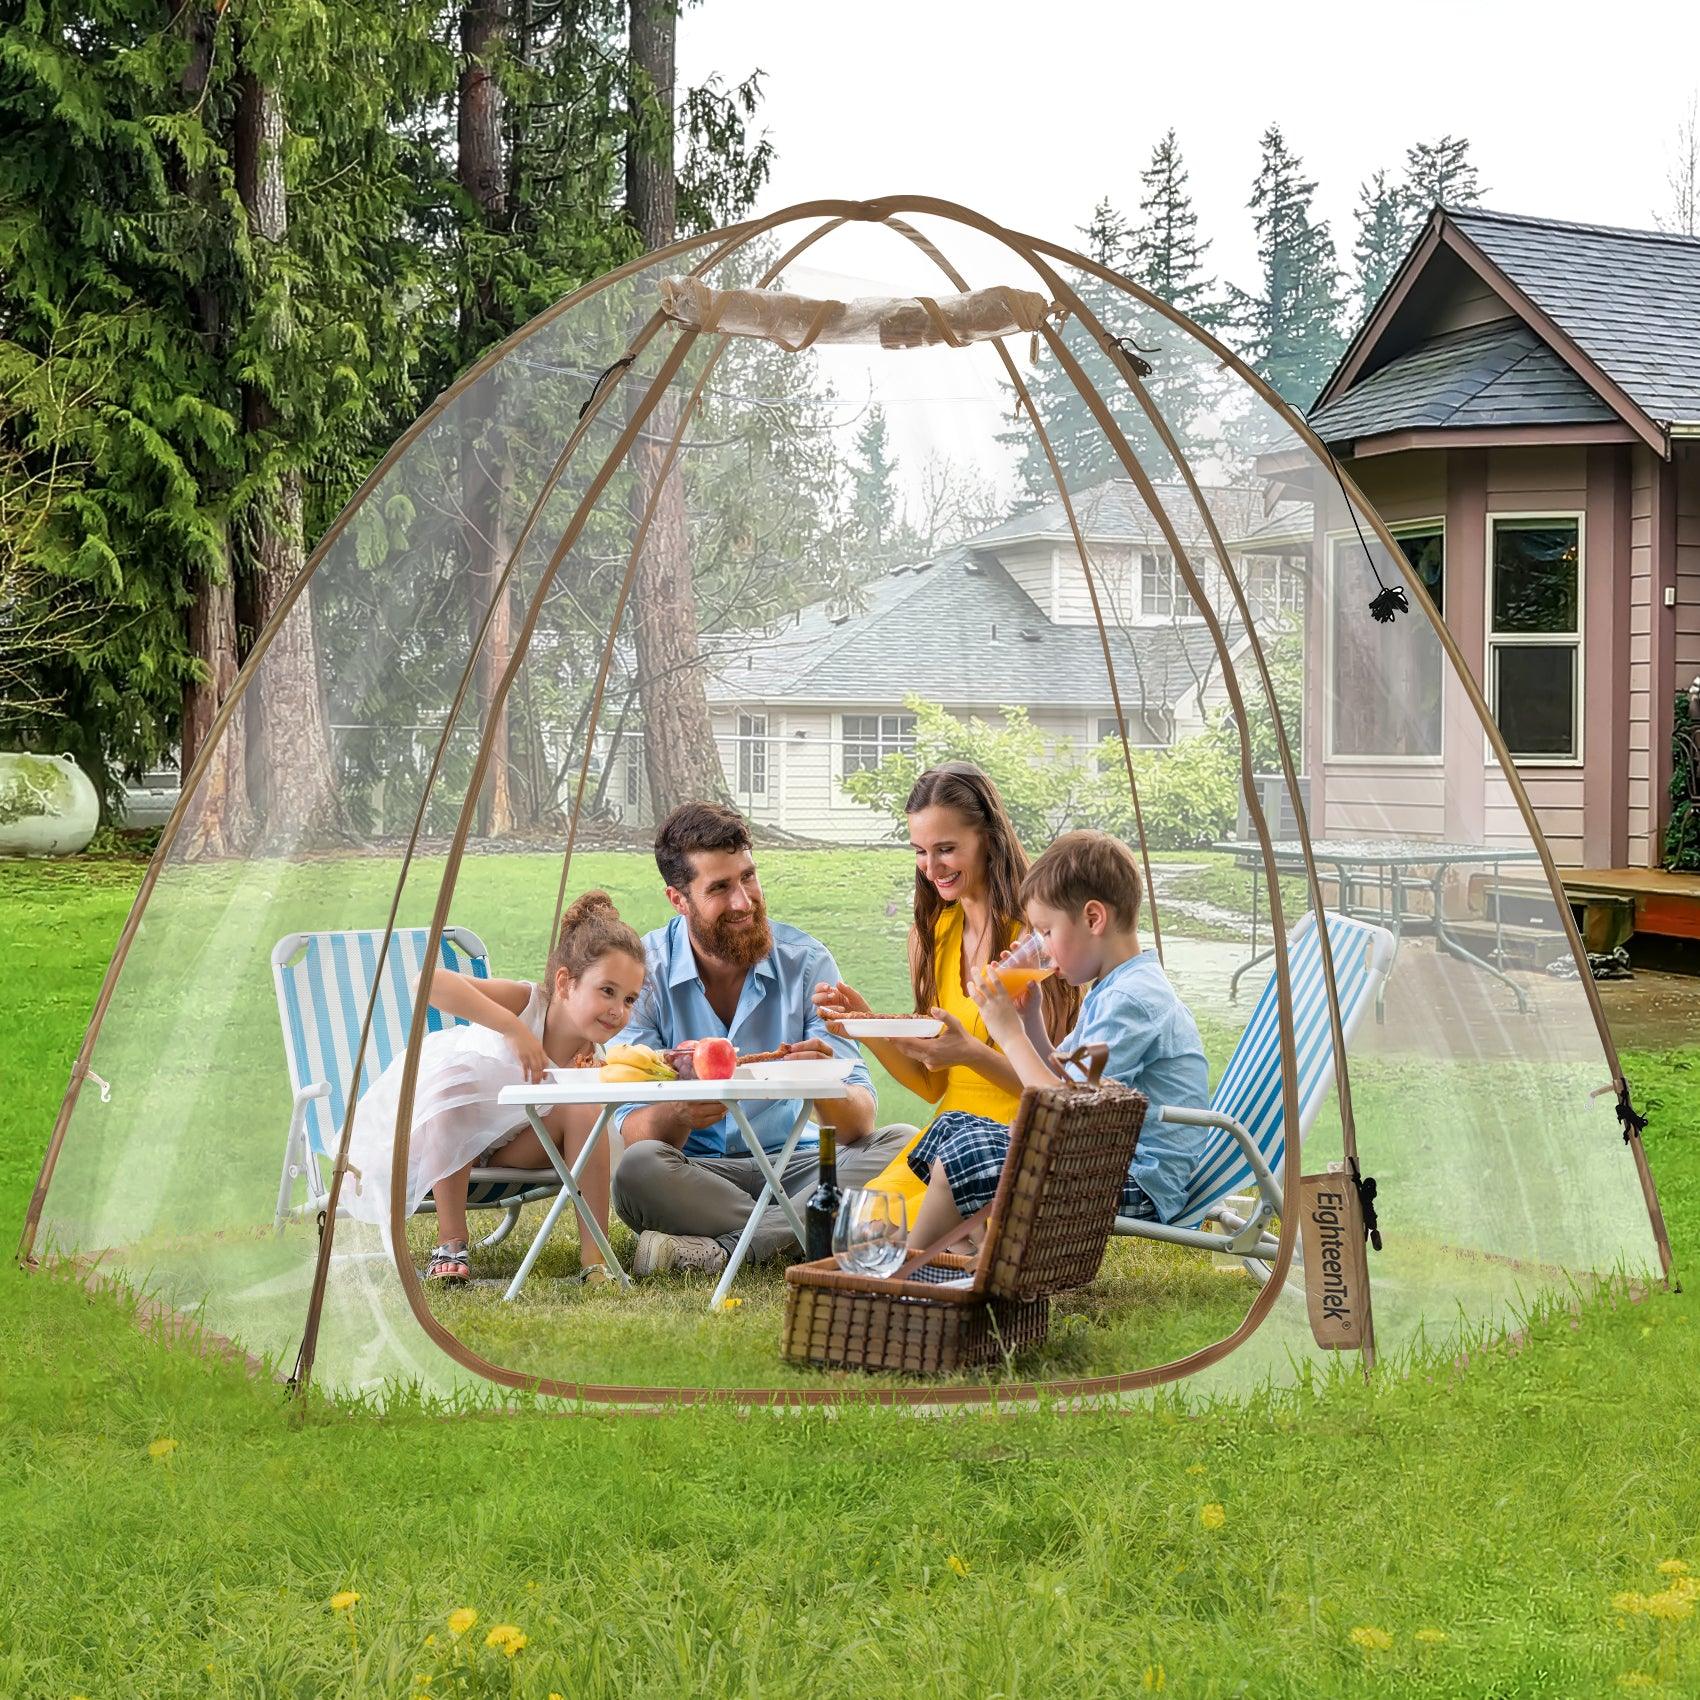 eighteentek clear bubble tent for family picnic